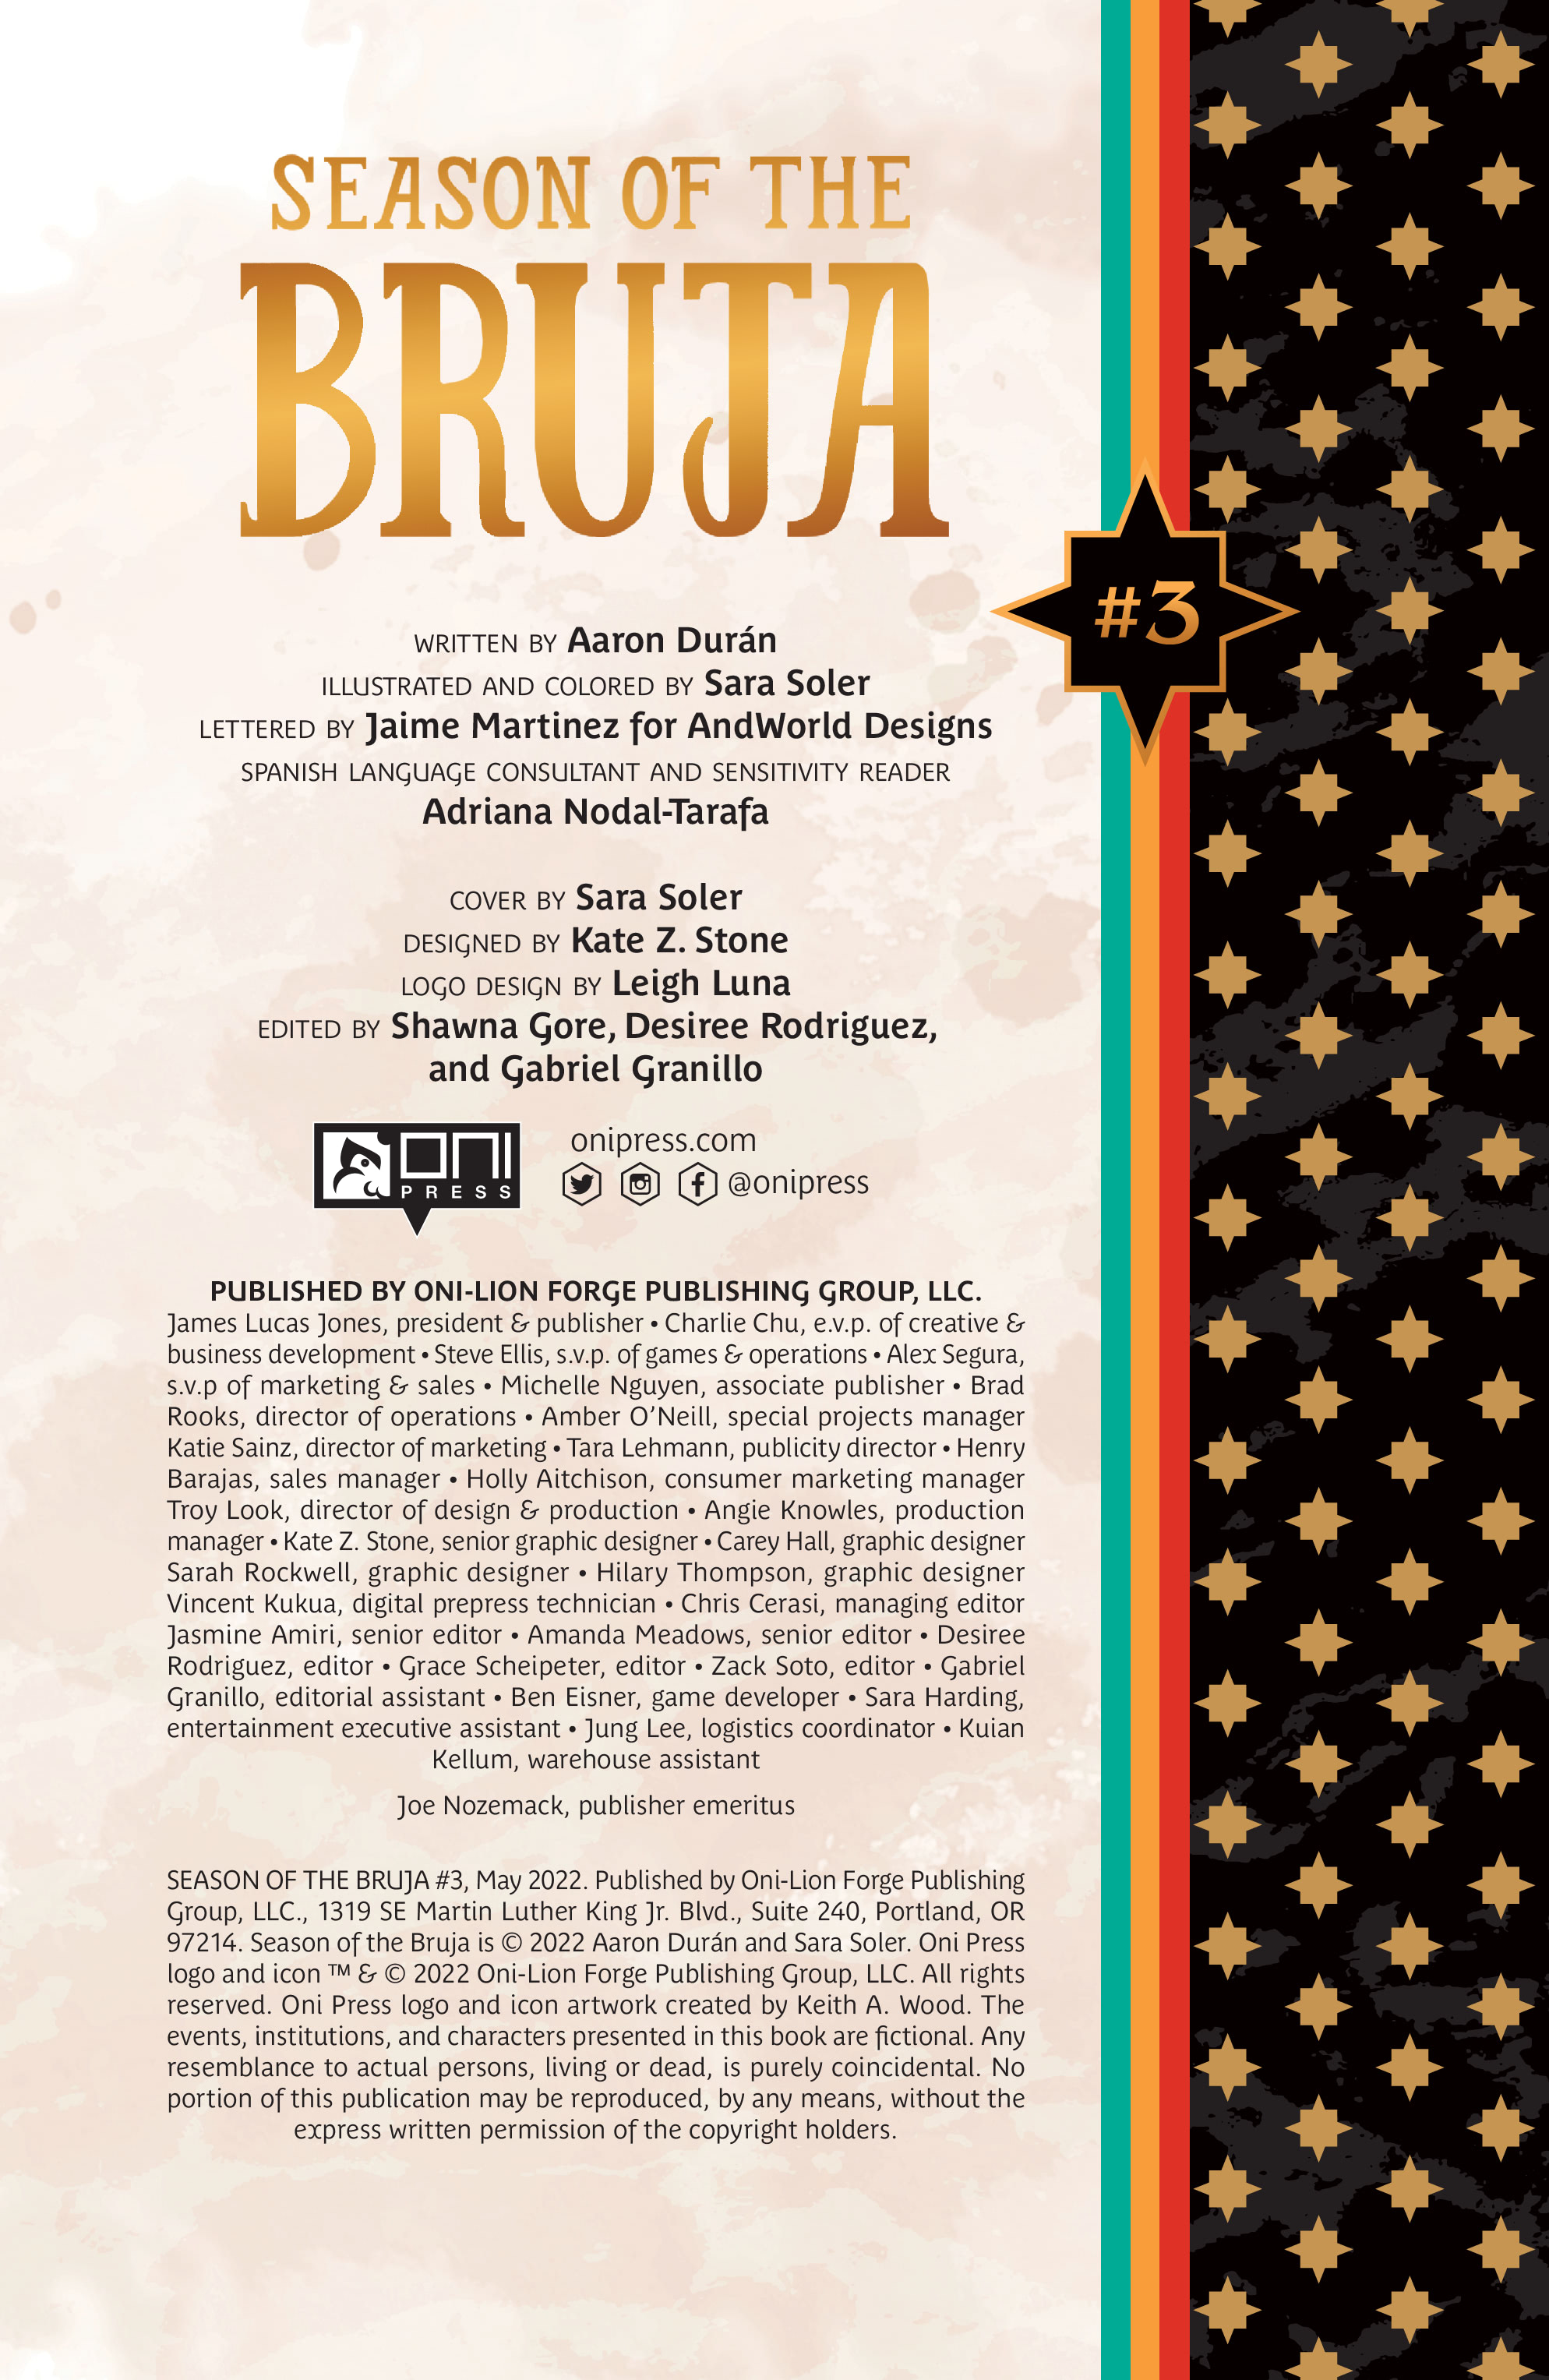 Read online Season of the Bruja comic -  Issue #3 - 2